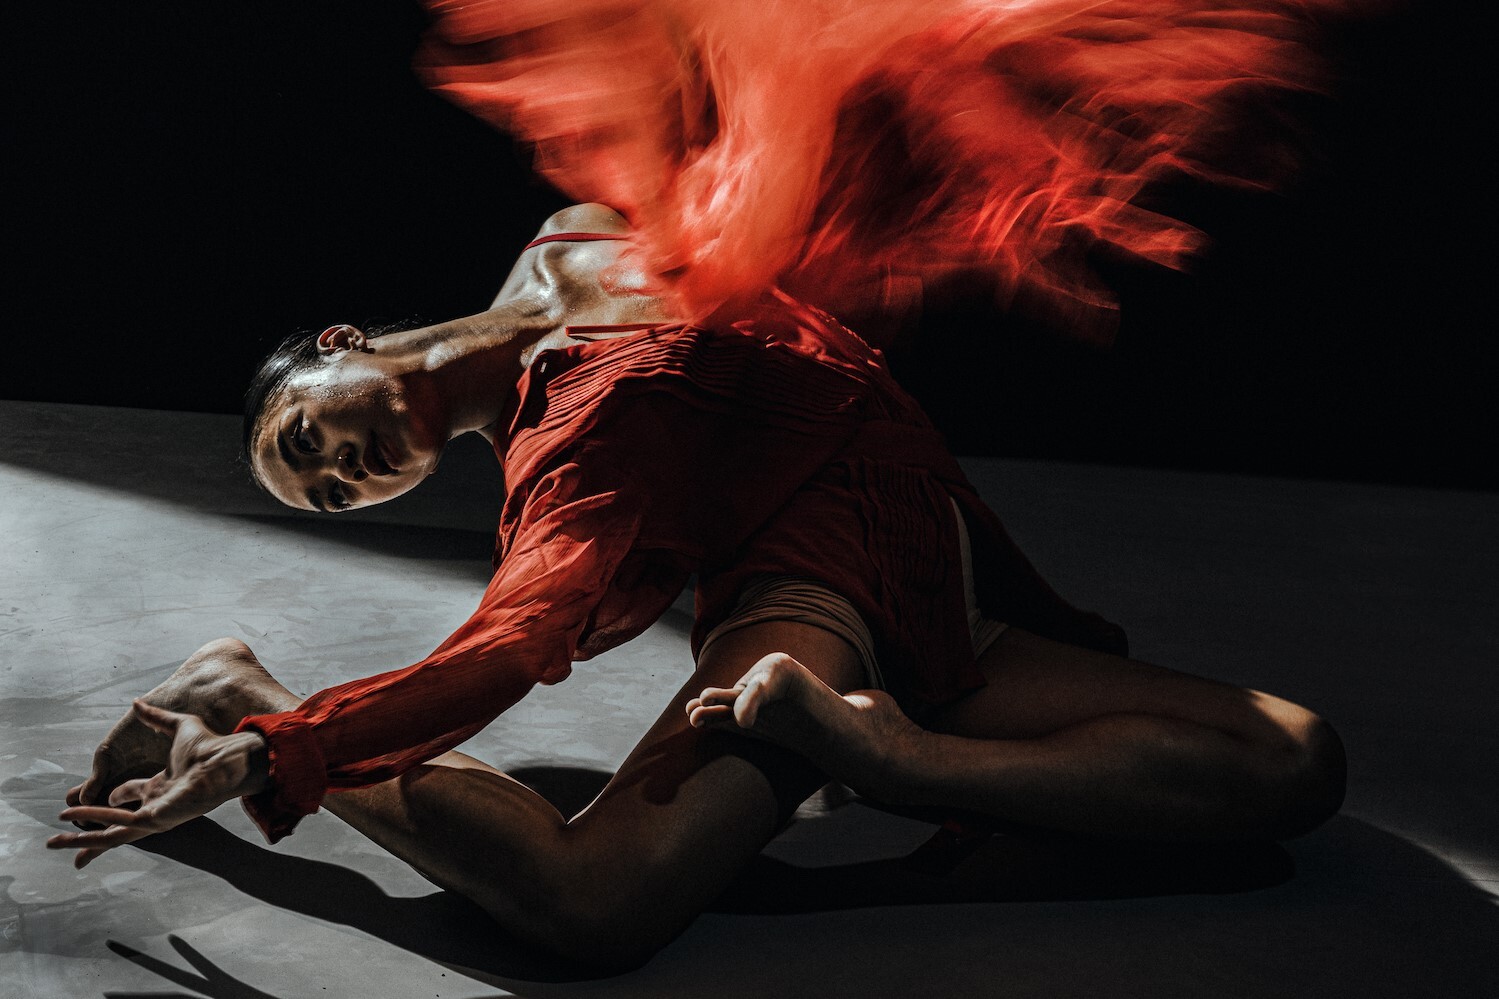 A woman wearing a red dress is on the floor arching backwards with one arm out reached and her head leaning back. Red smoke is coming off of her body